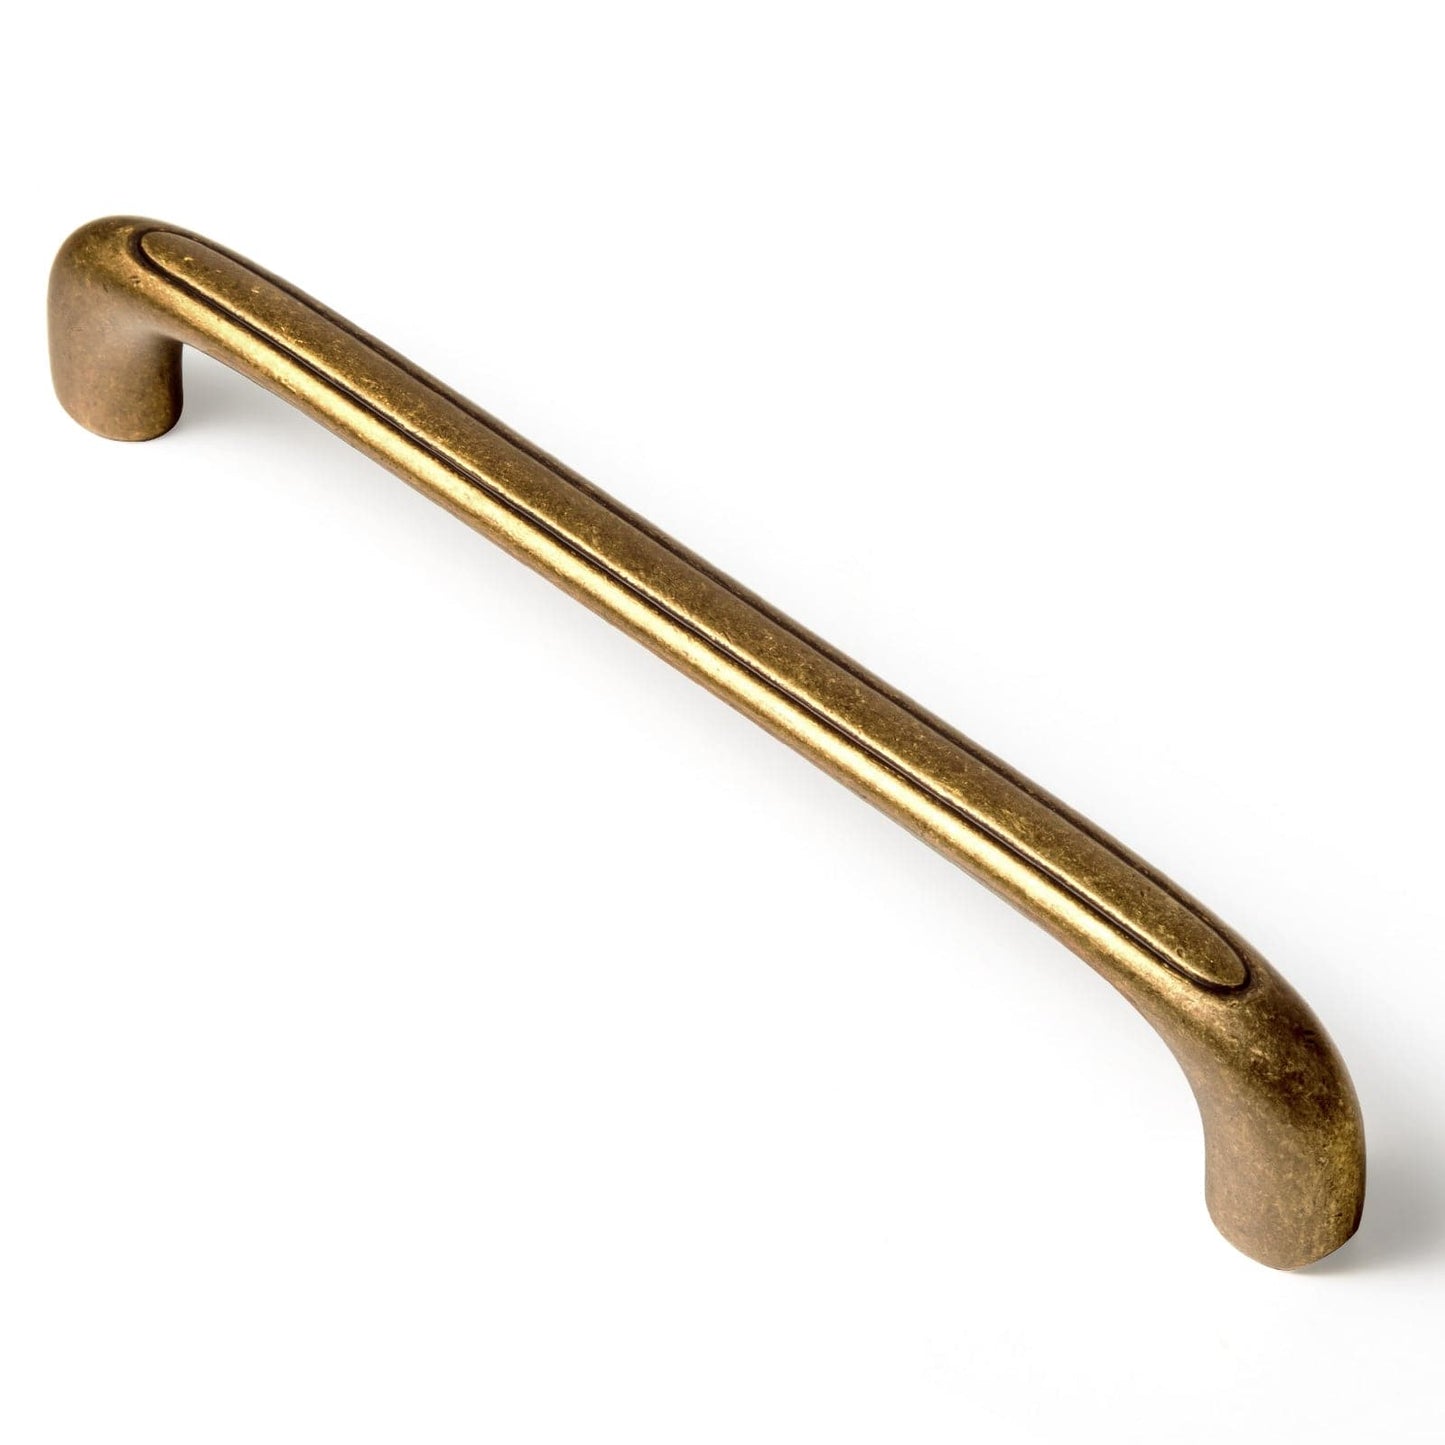 Elegant Antique and Brushed Brass Bar Pull Cabinet Handles with Unique Design 6 Pack